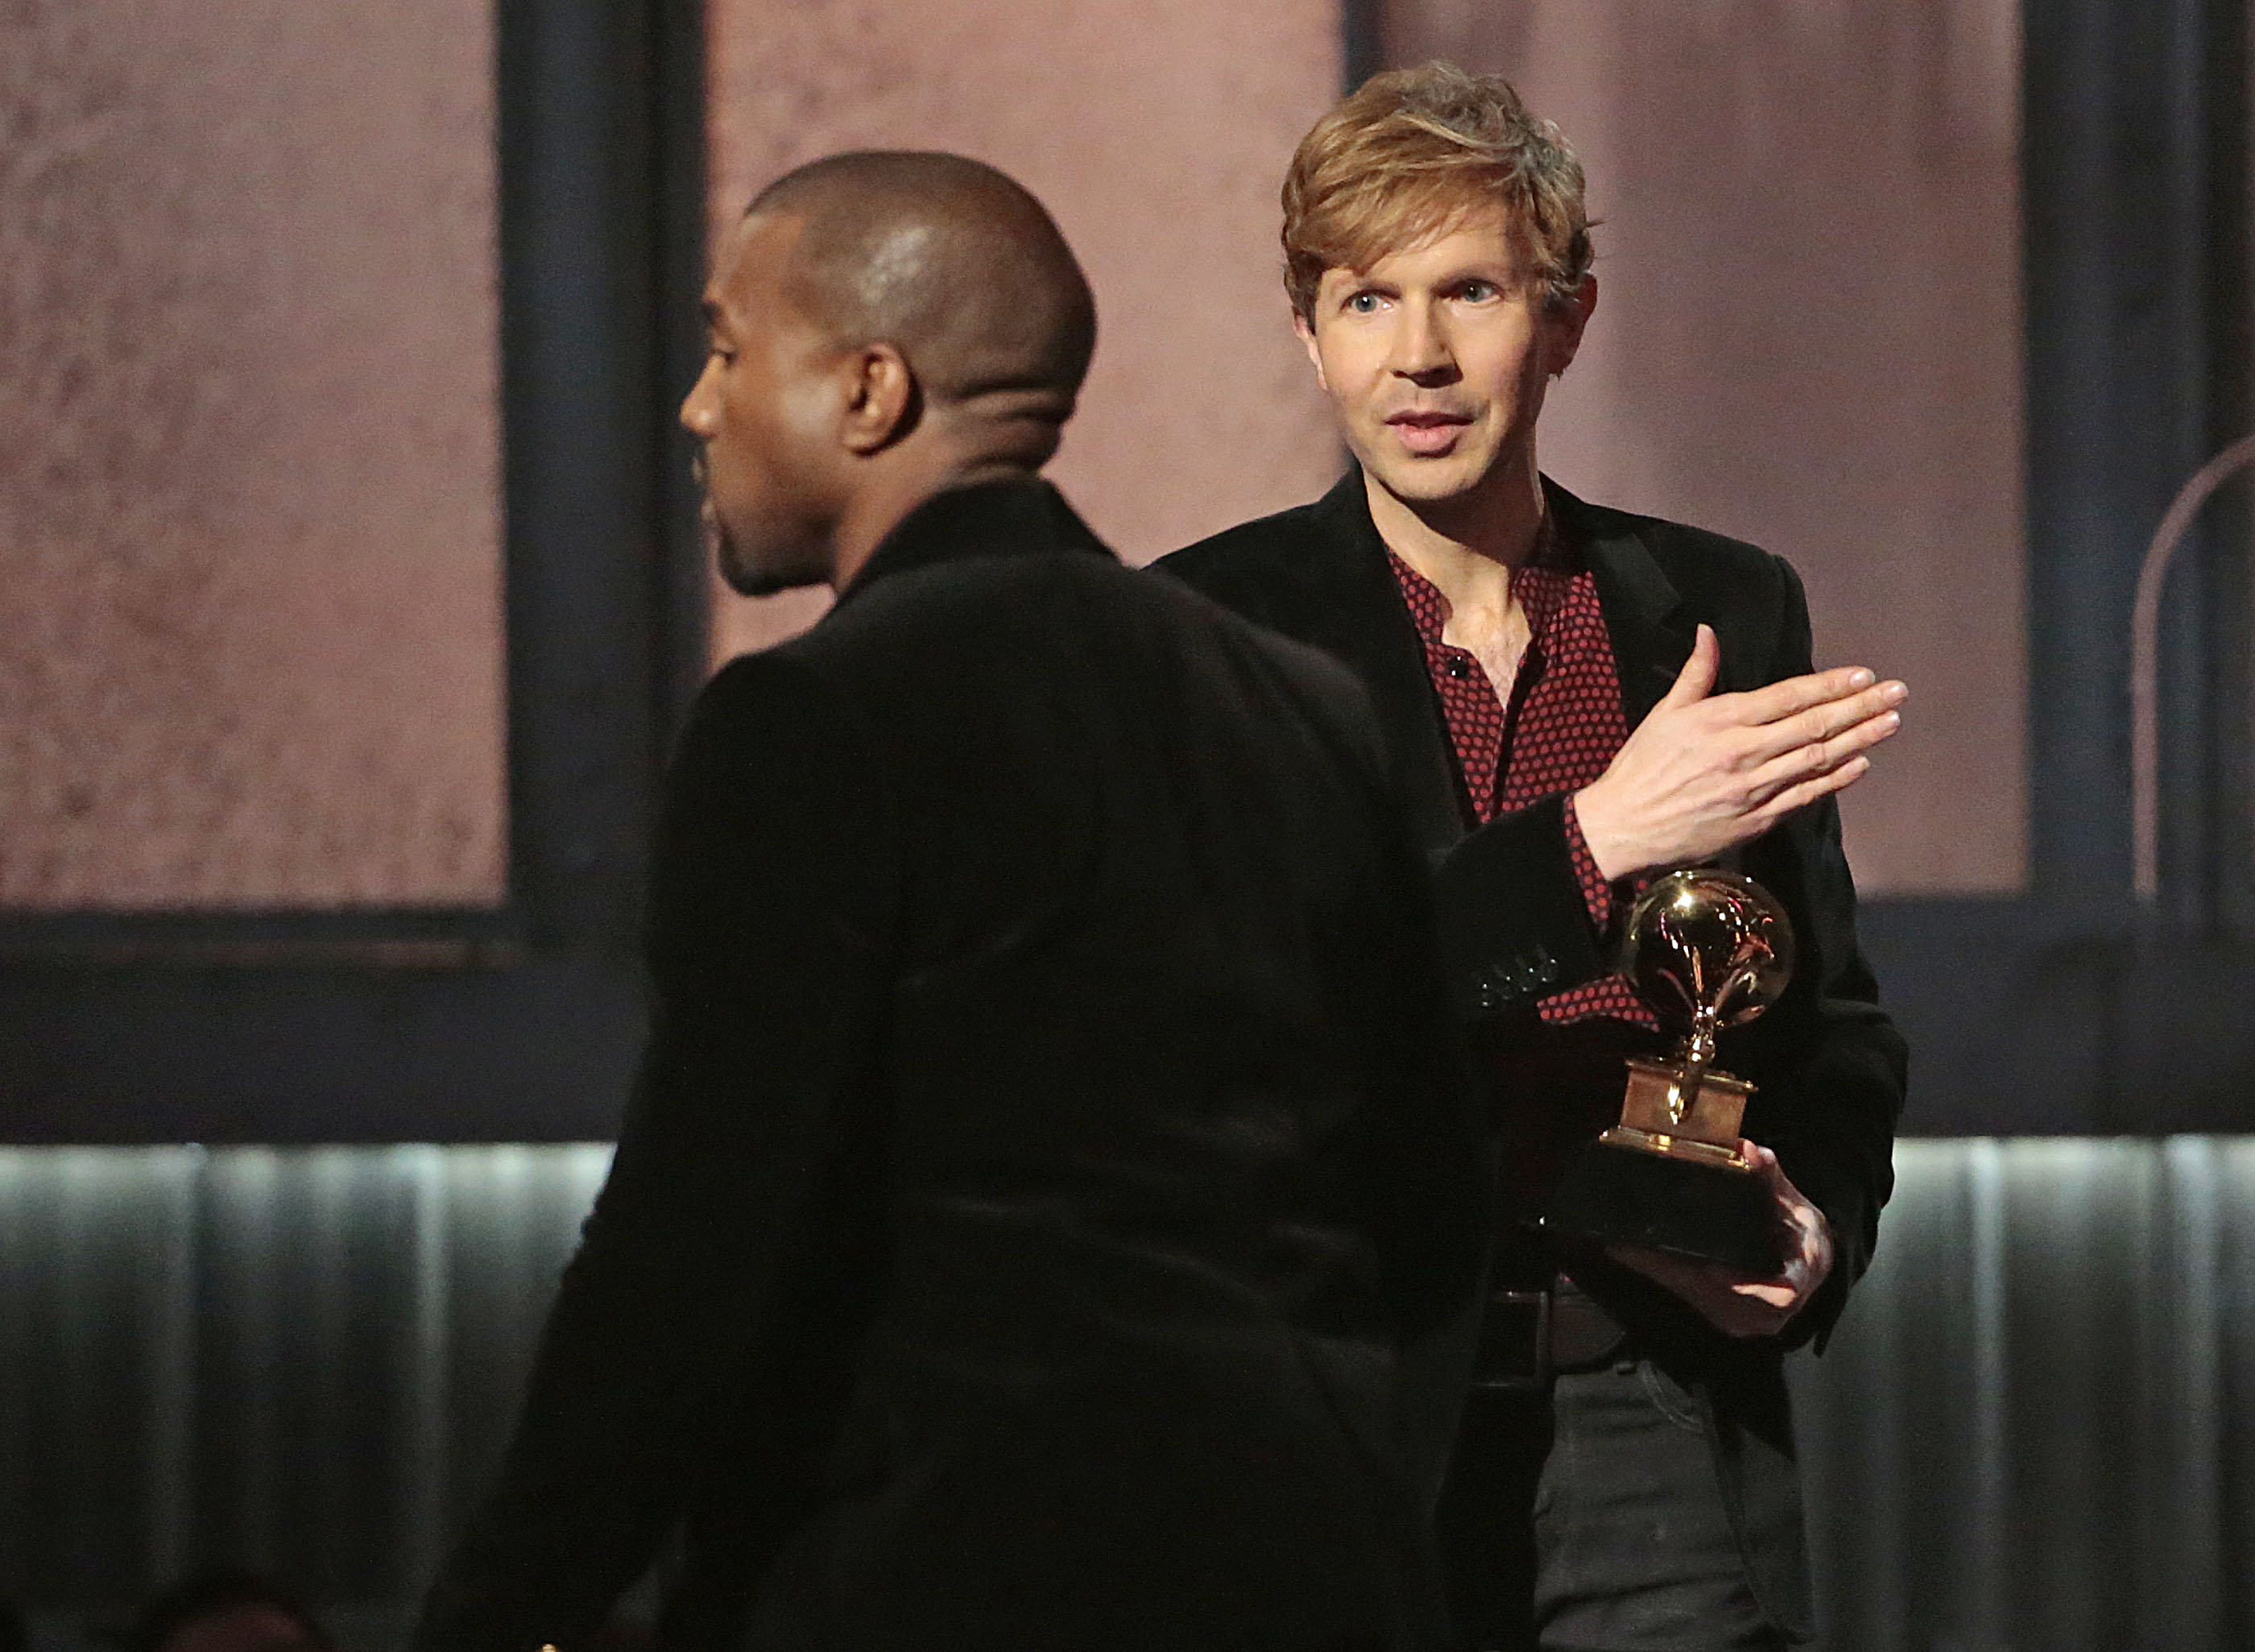 LOS ANGELES, CA - February 8, 2015 Kanye West avoids contact with an inviting Beck after Beck won Al